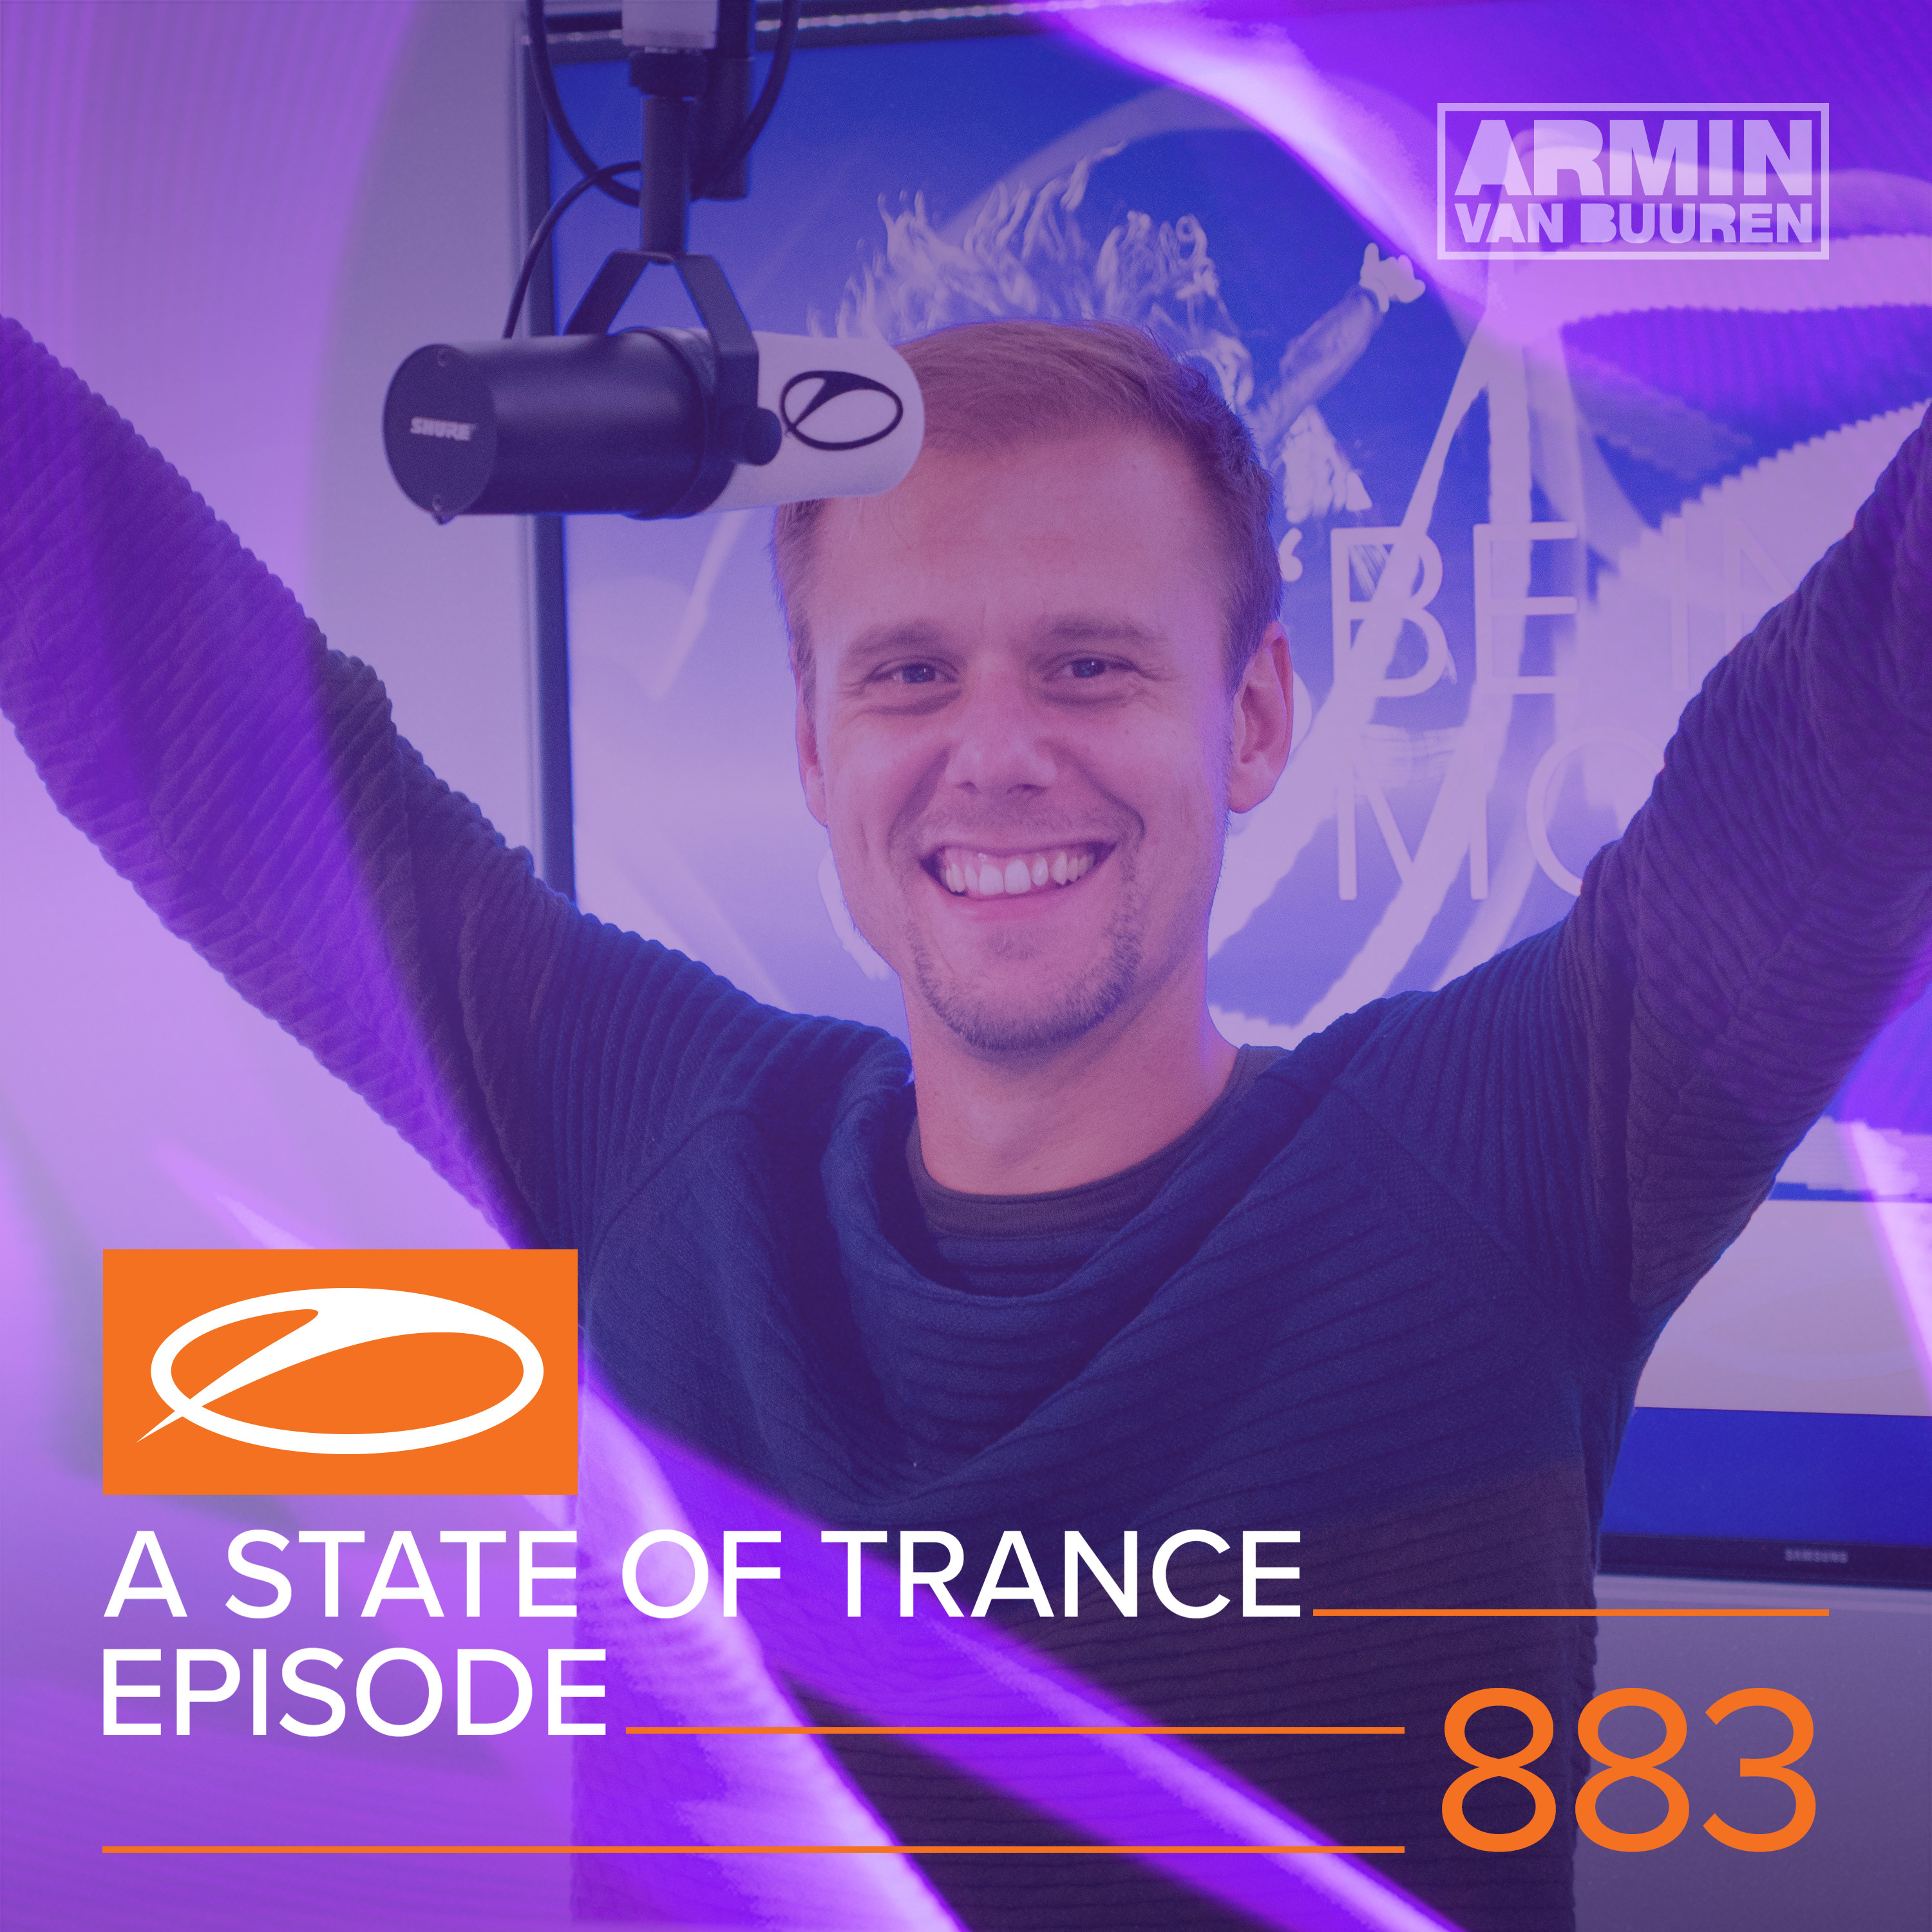 When You're Gone (ASOT 883) (Ben Nicky Remix)